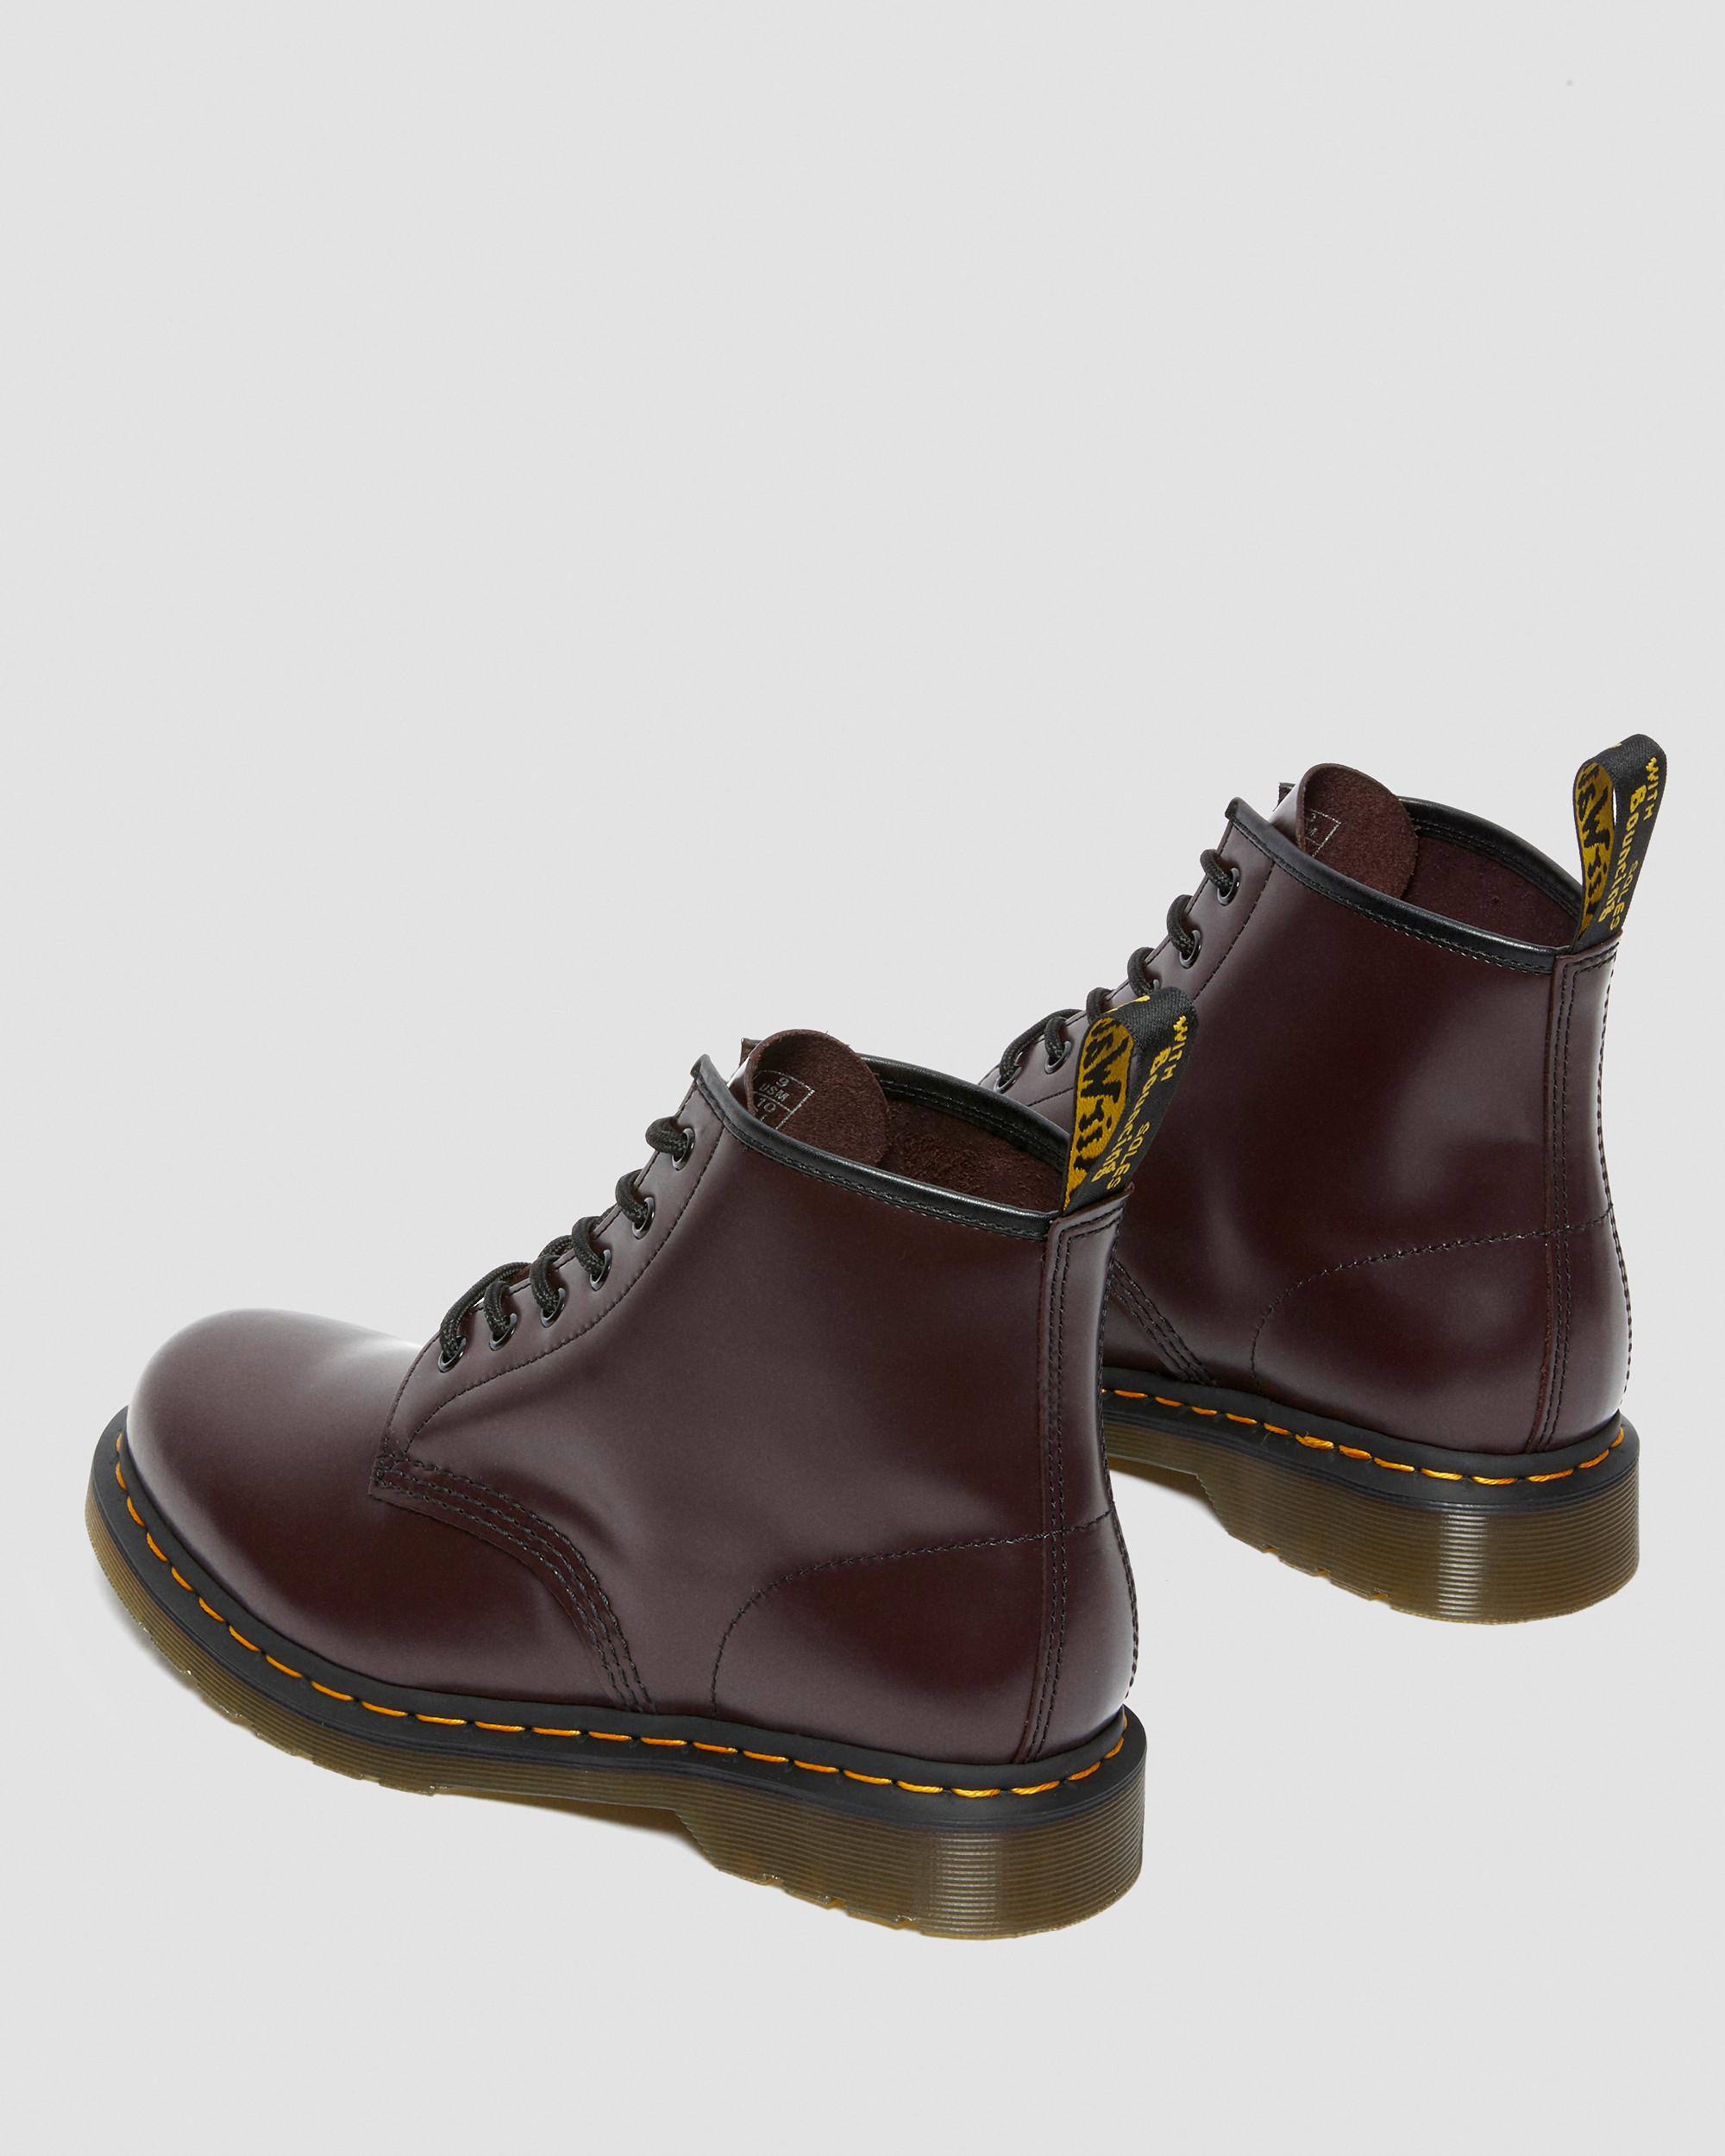 101 Yellow Stitch Smooth Leather Ankle Boots in Burgundy | Dr. Martens